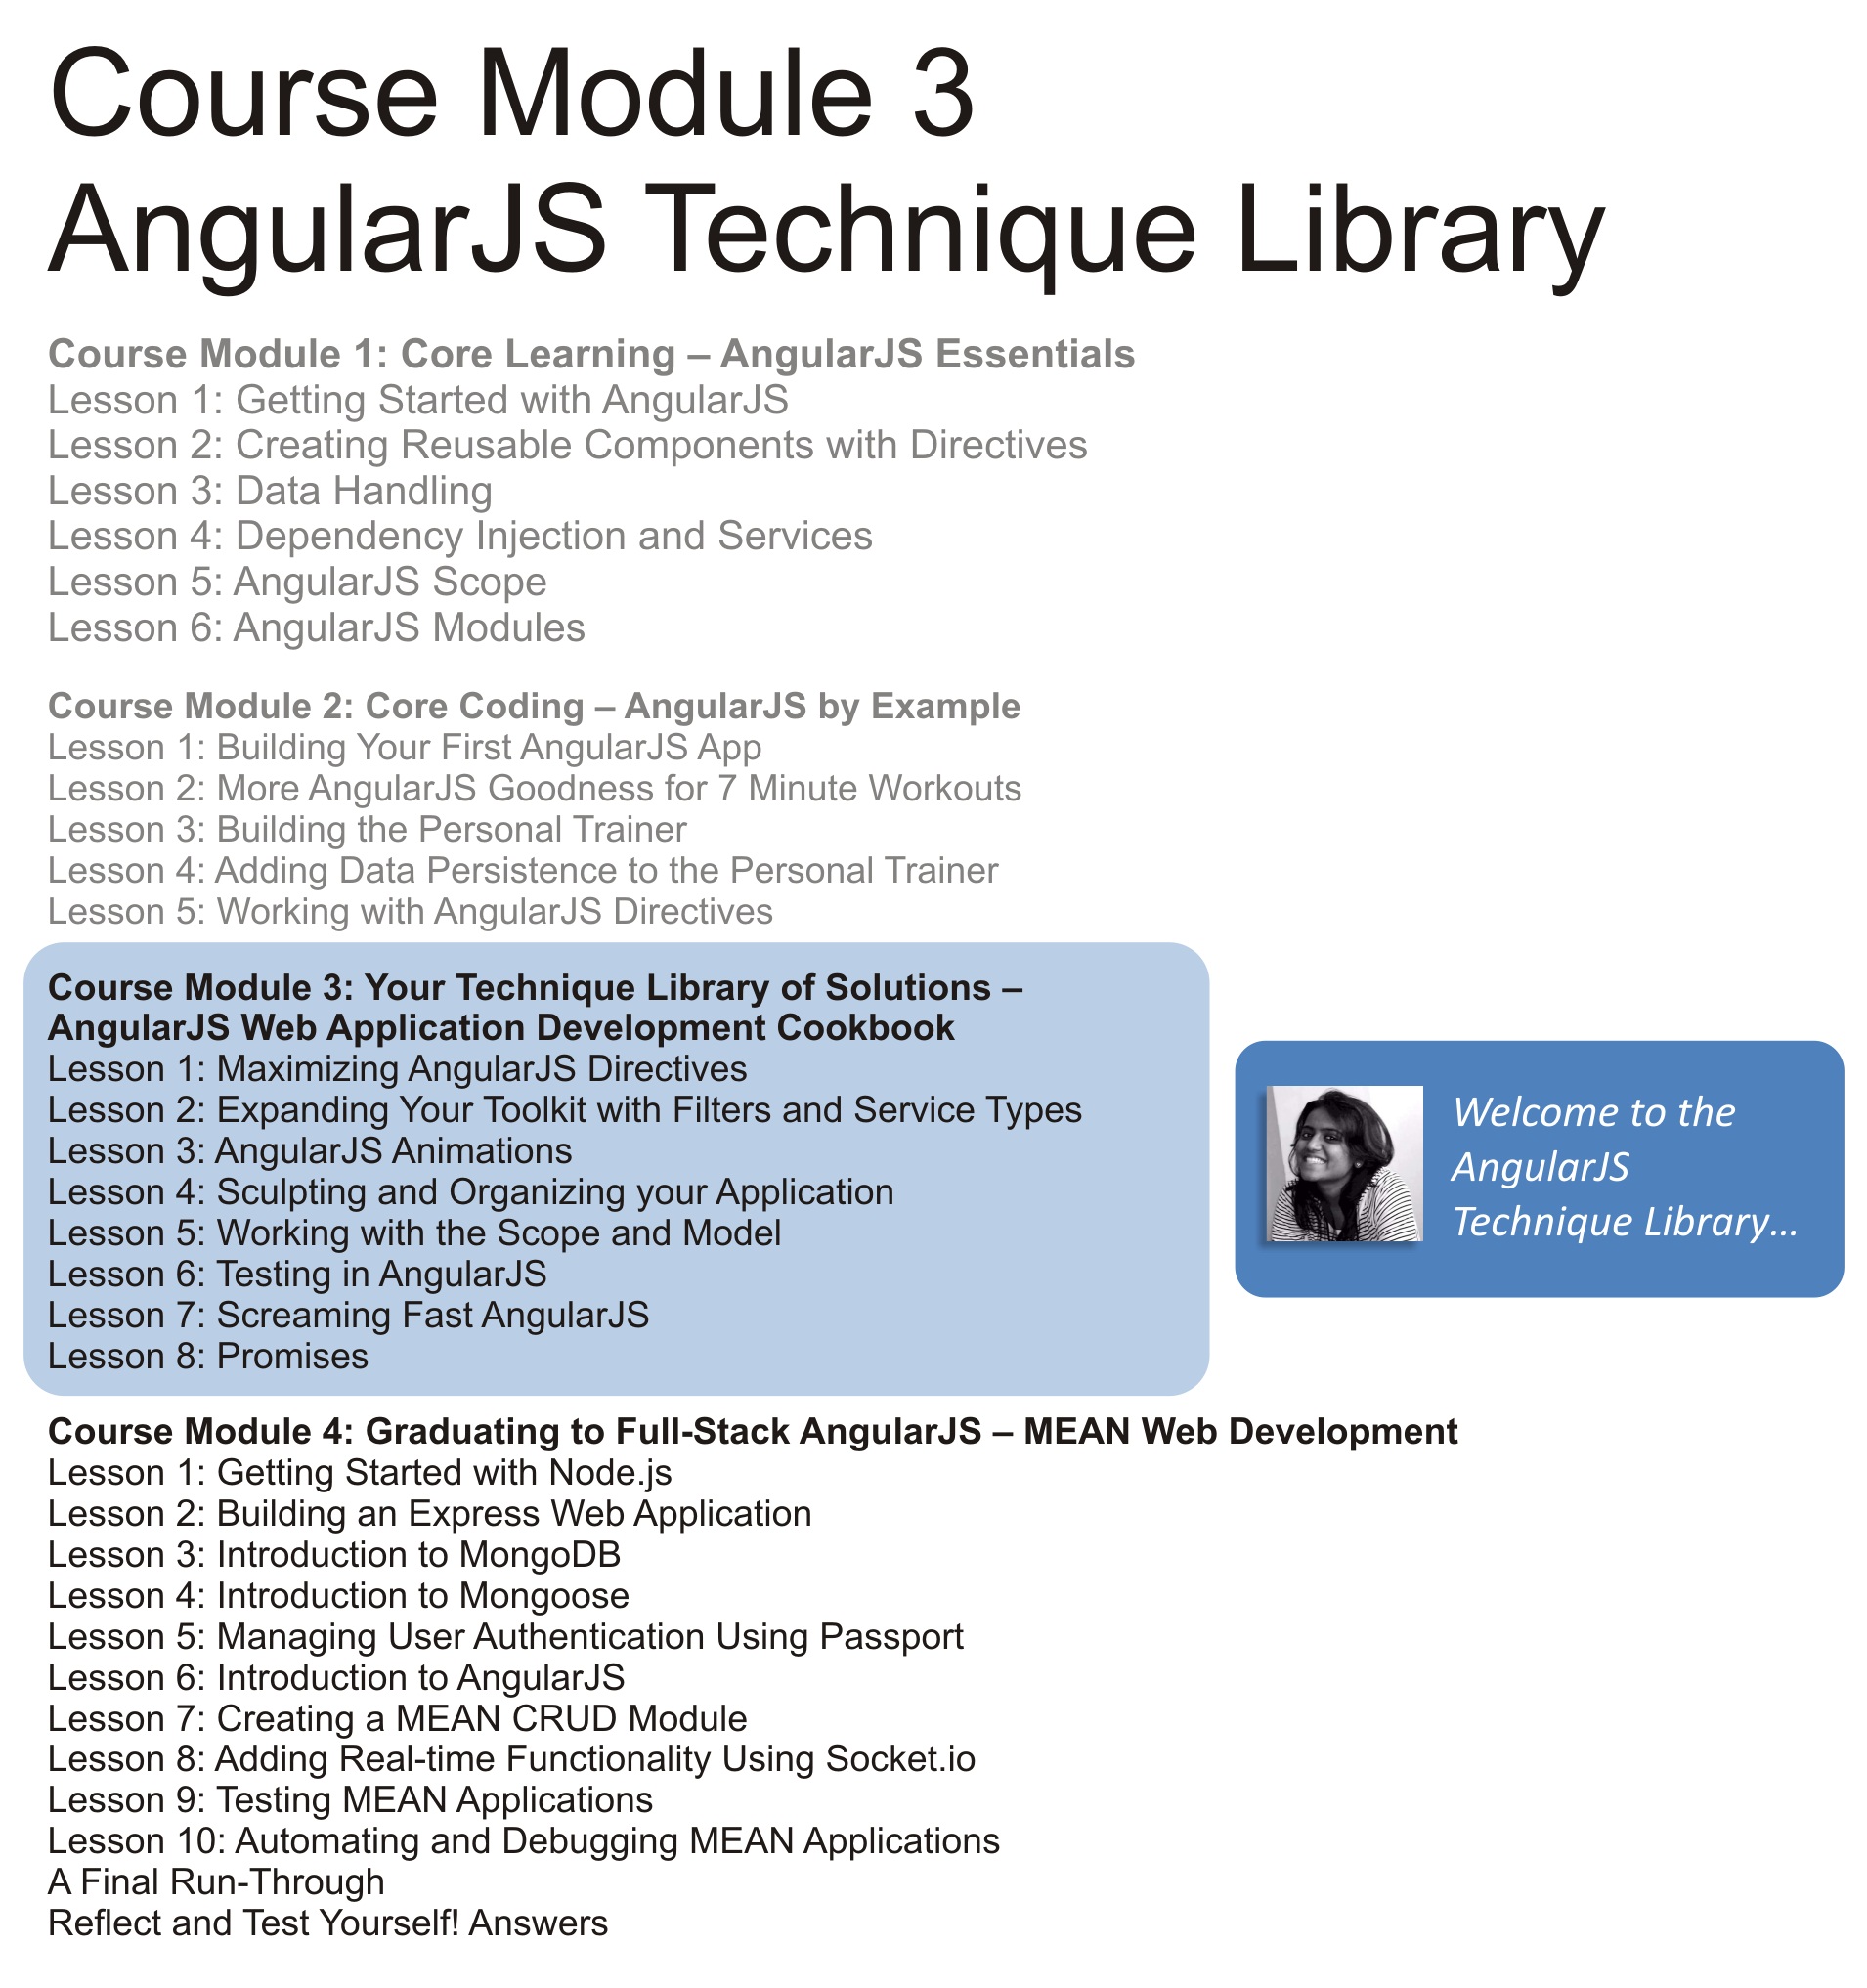 Your AngularJS Technique Library – AngularJS Web Application Cookbook